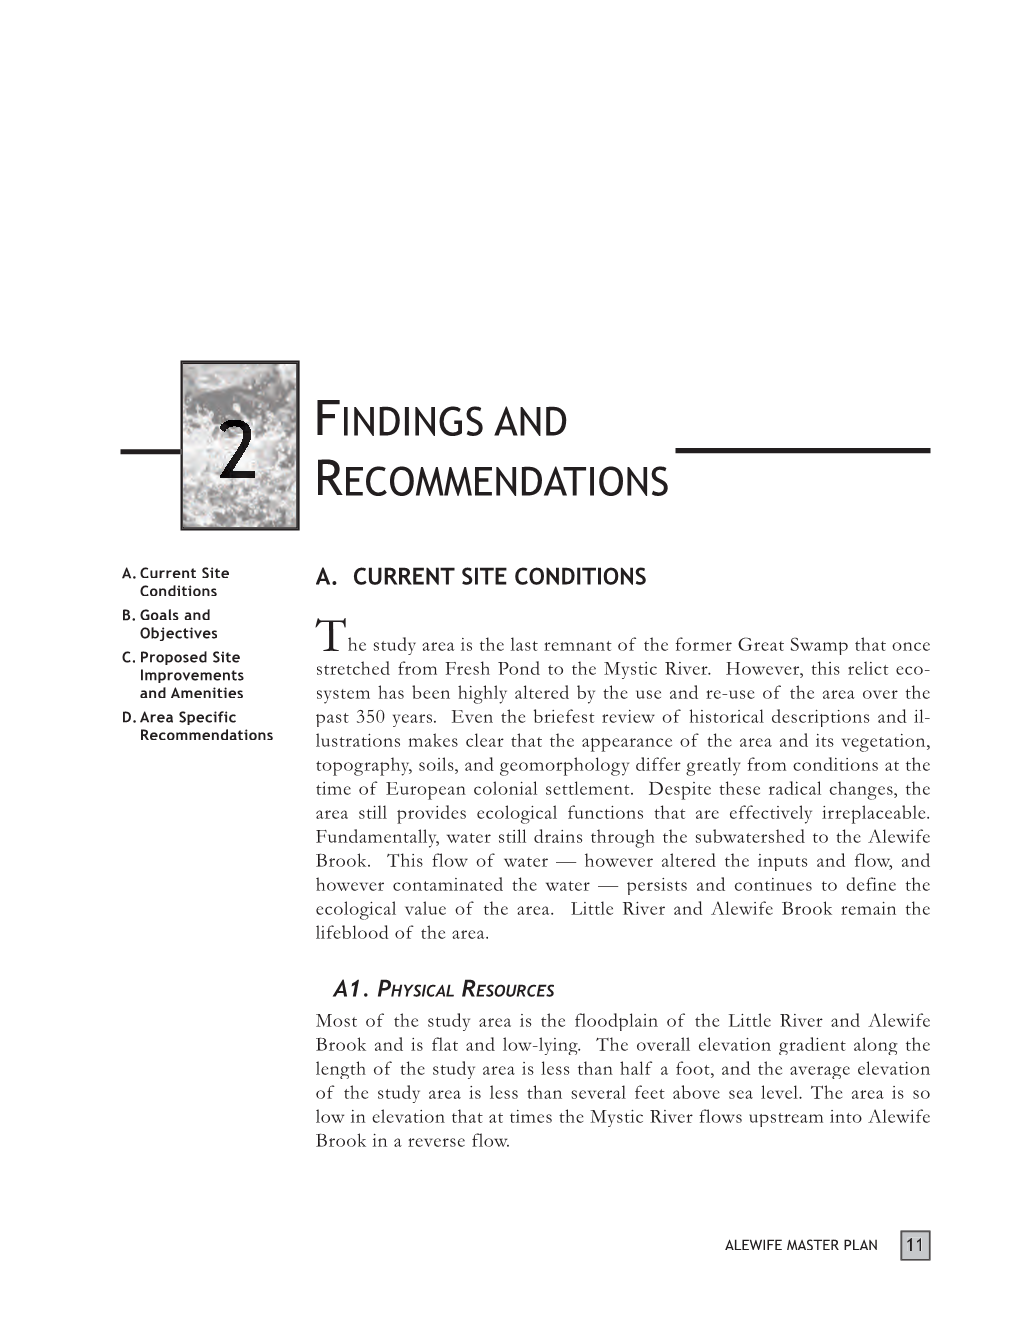 Findings and Recommendations